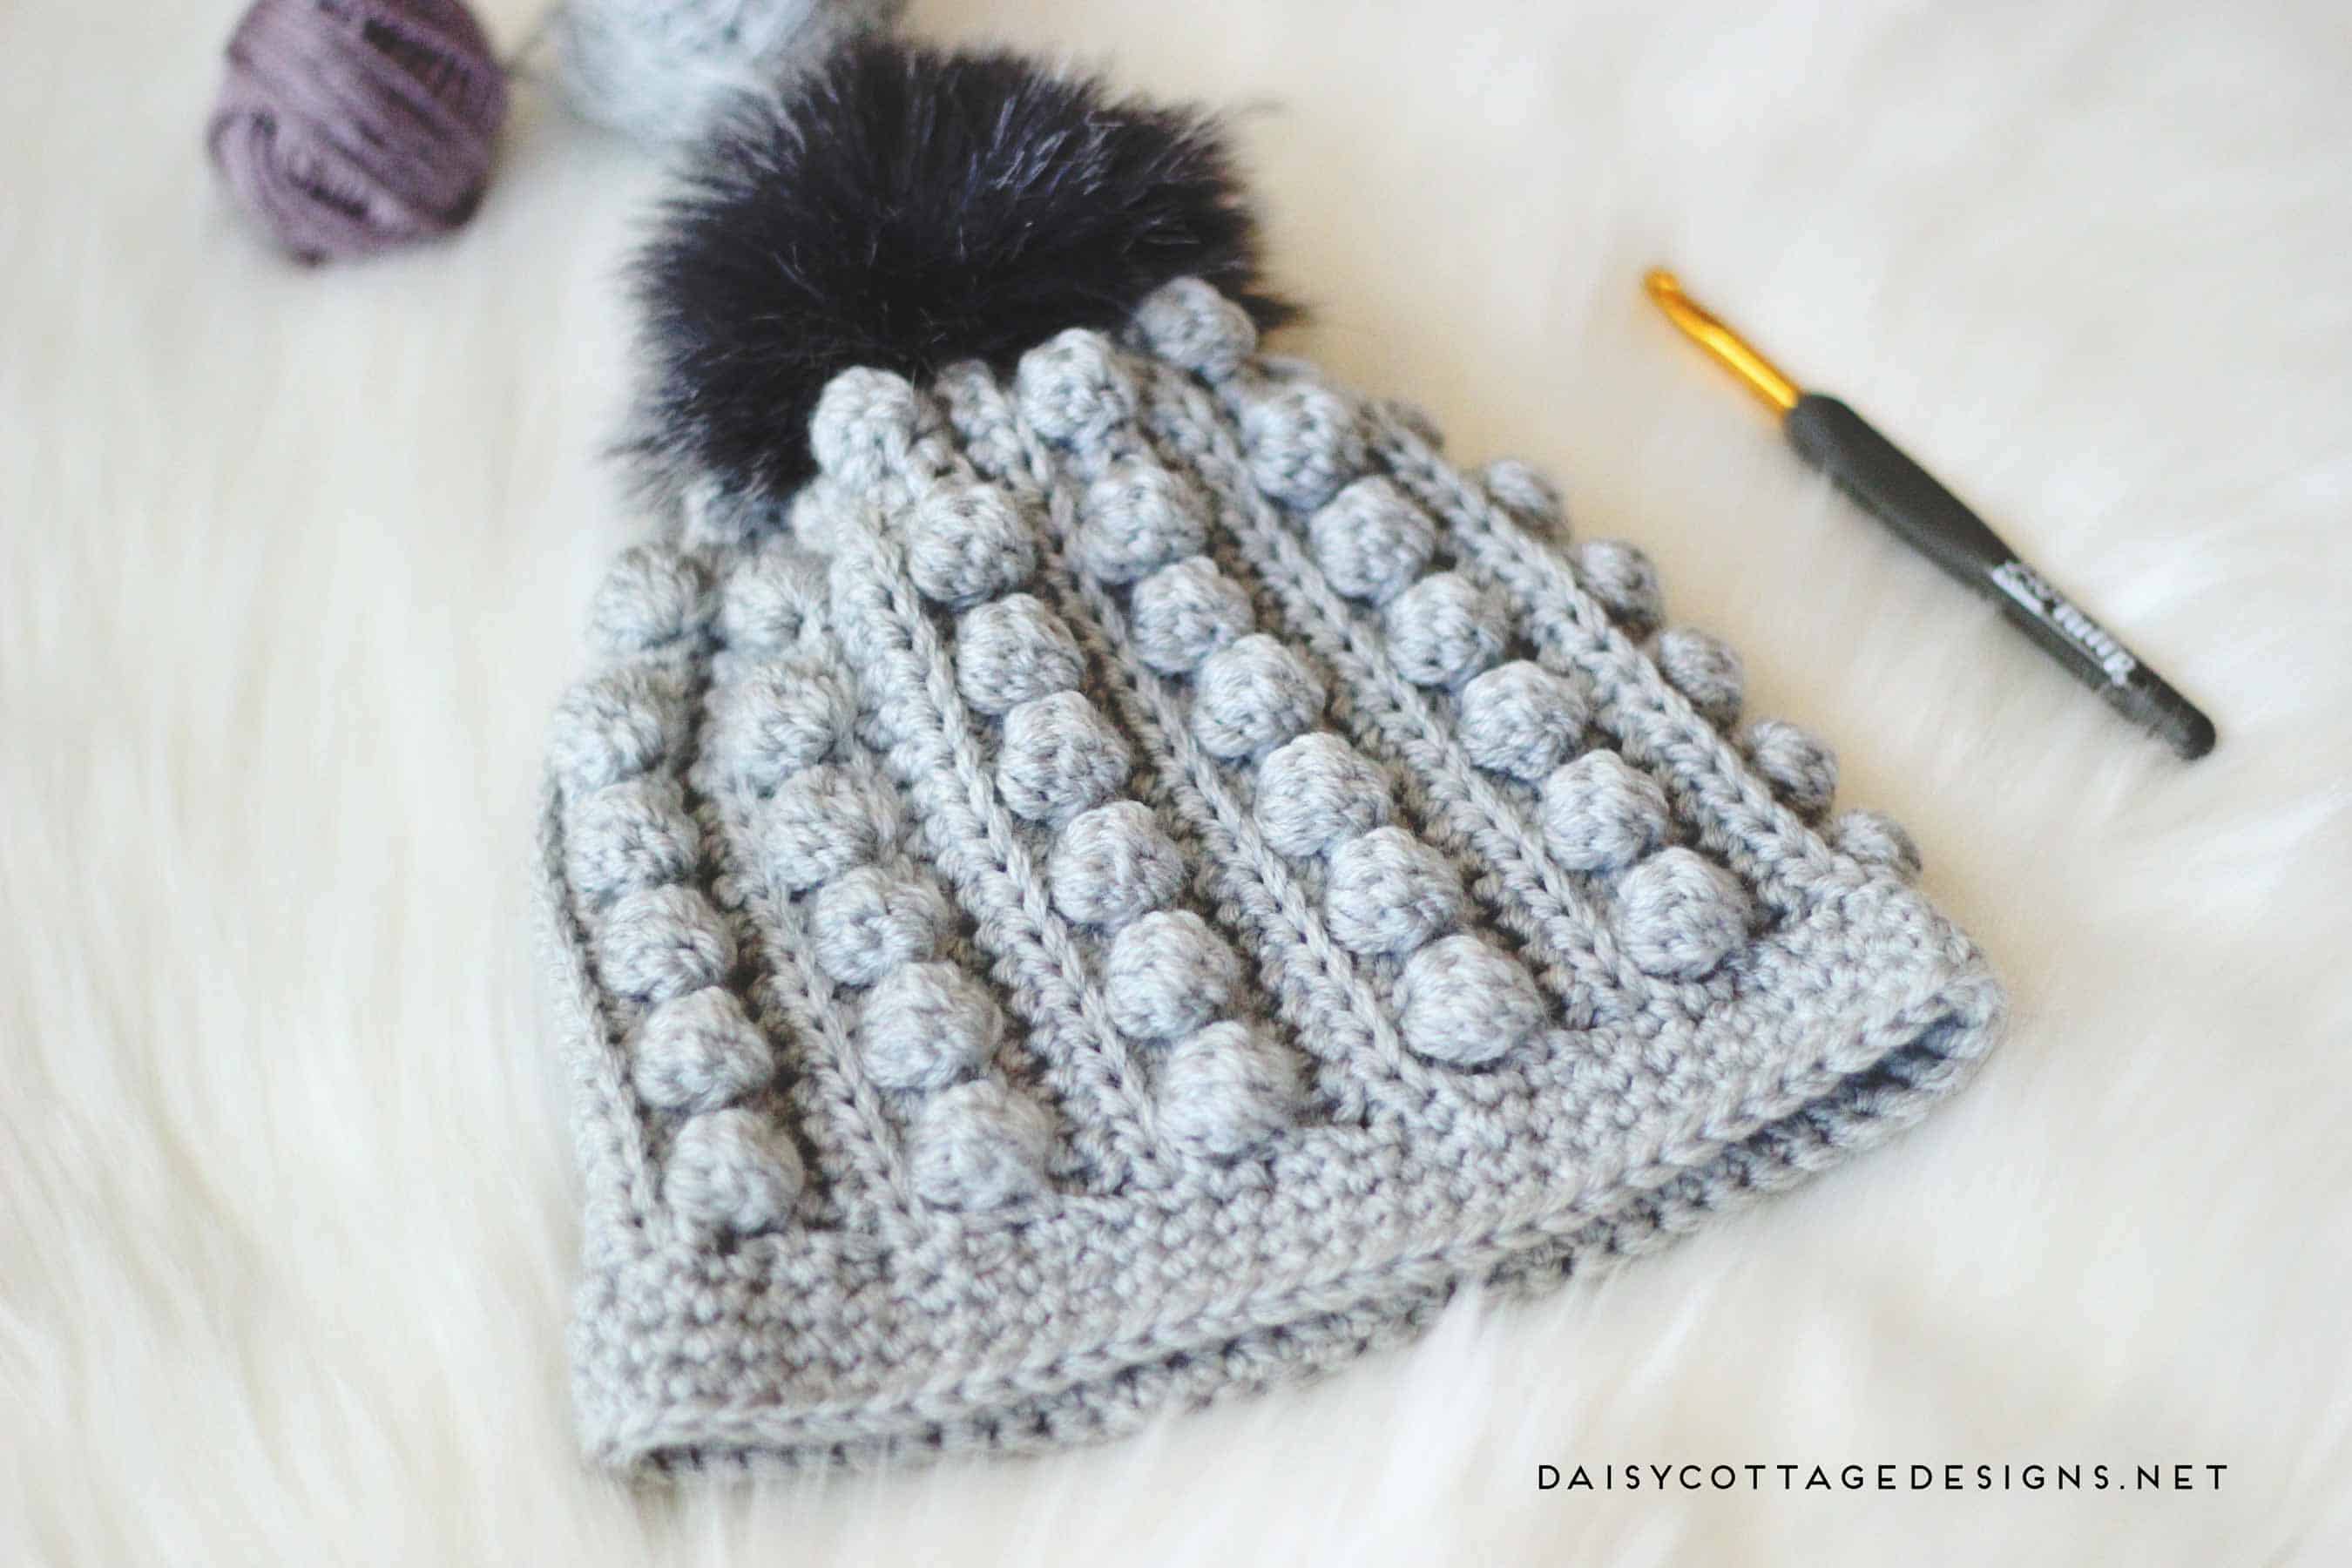 Use this free bobble beanie crochet pattern to create an adorable crochet hat for anyone on your gift list. Cozy and warm, it's the perfect winter hat. | bobble toboggan, Daisy Cottage Designs, free crochet pattern, free hat crochet pattern, crochet hat pattern free, bobble beanie